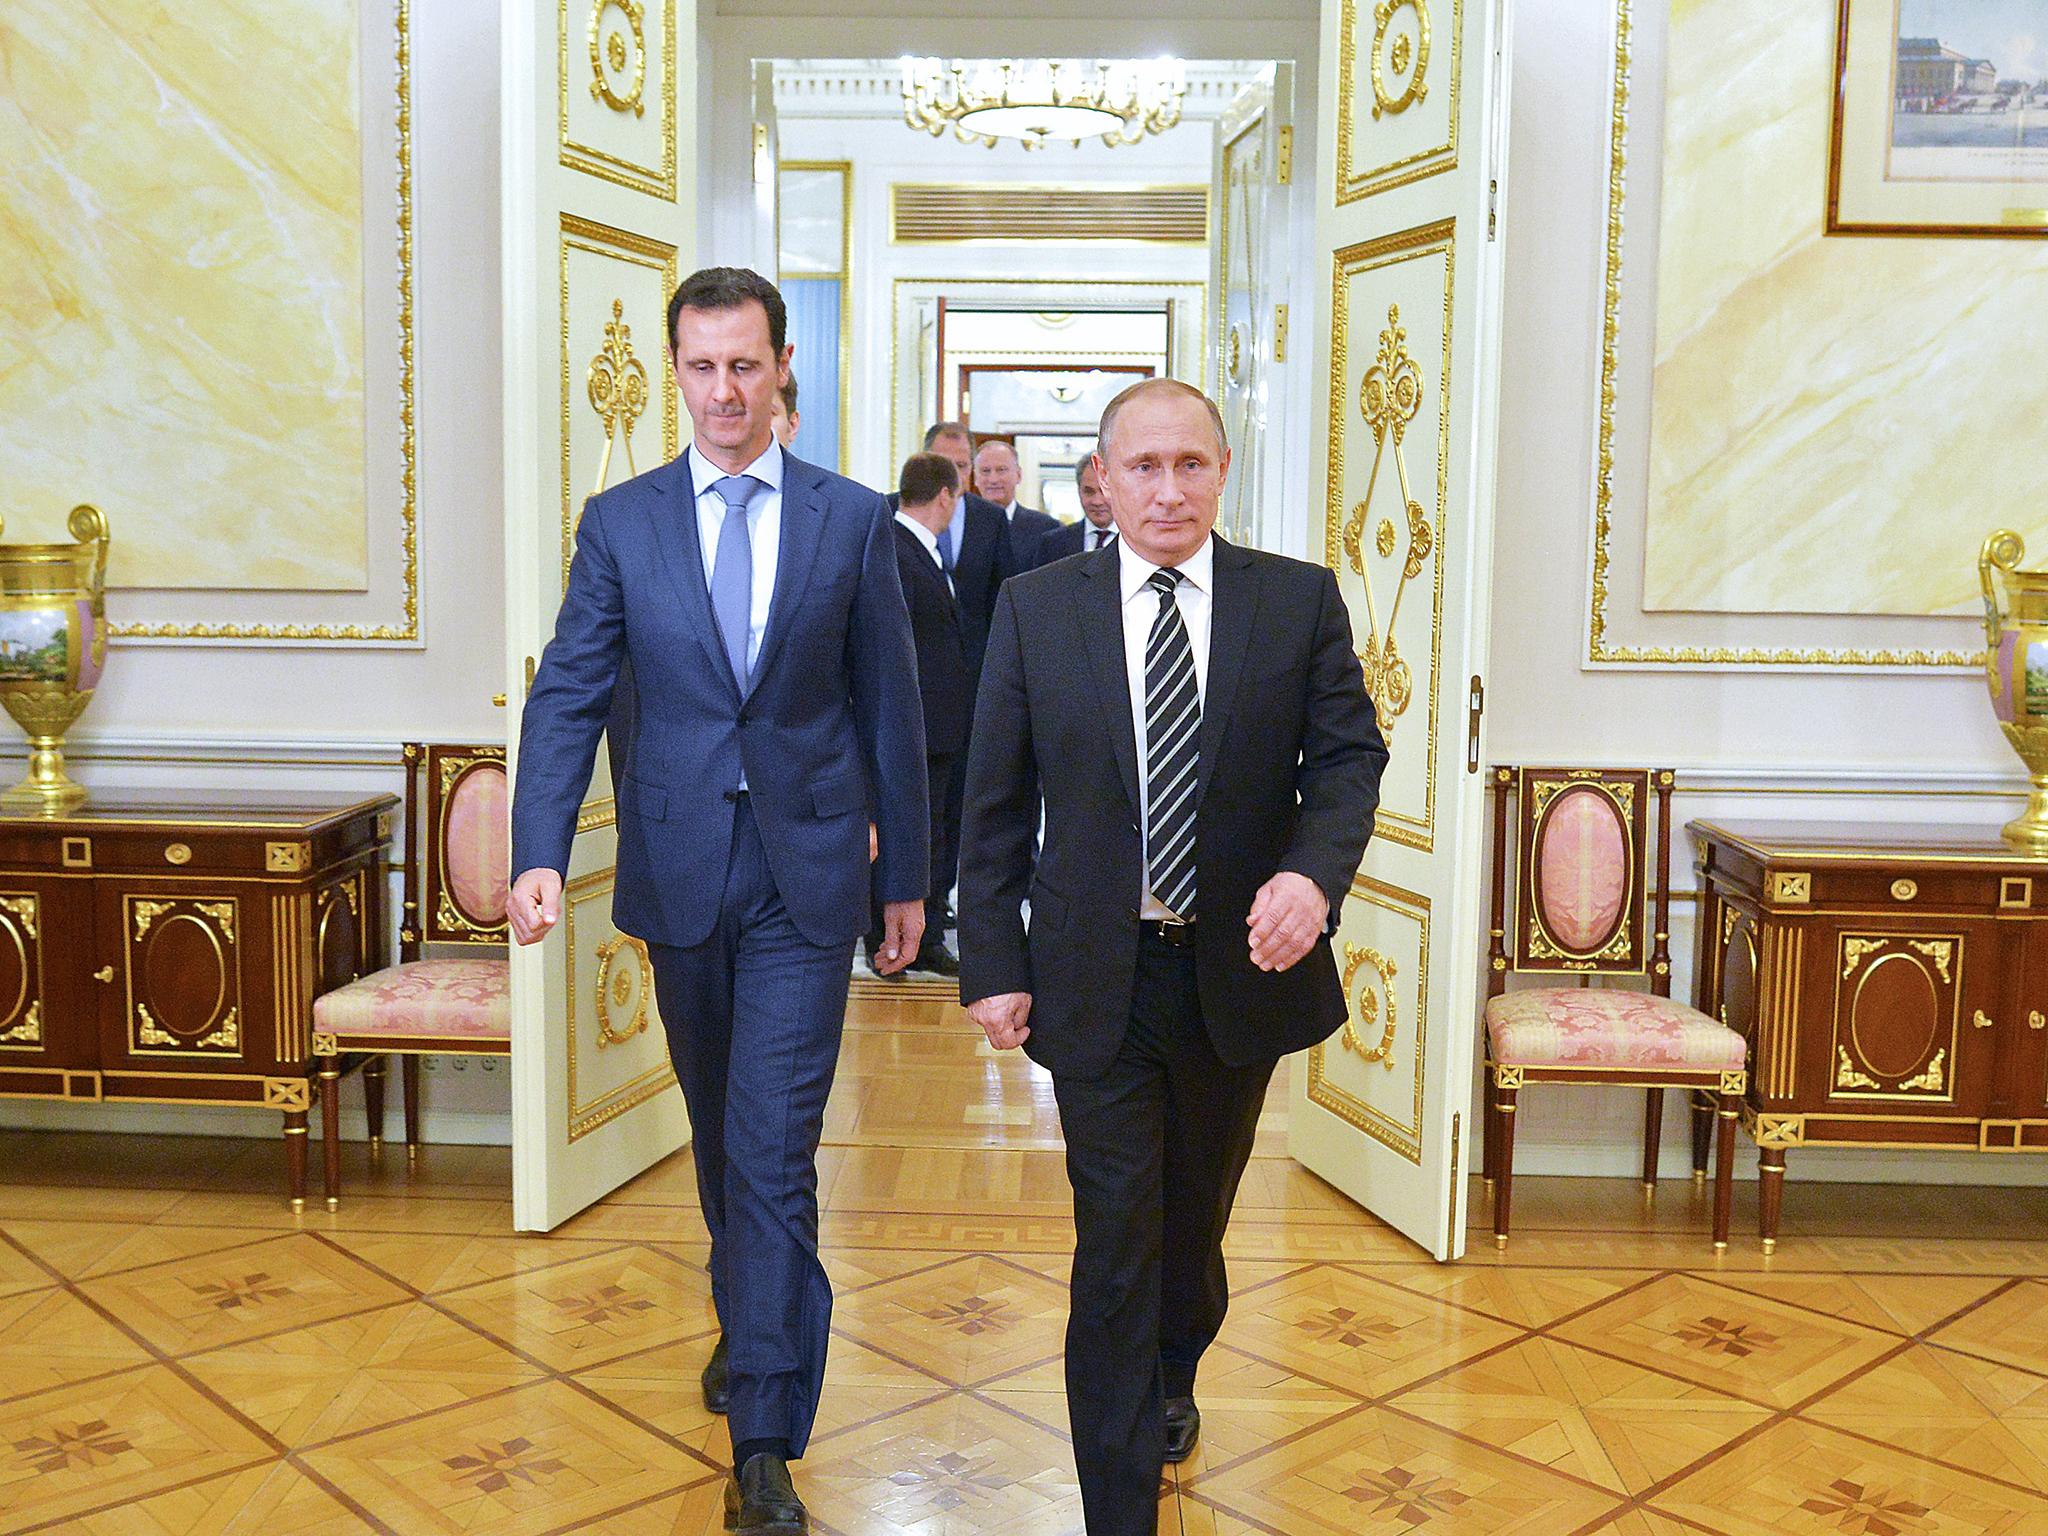 Russian President Vladimir Putin greets his Syrian counterpart Bashar al-Assad upon his arrival for a meeting at the Kremlin in Moscow